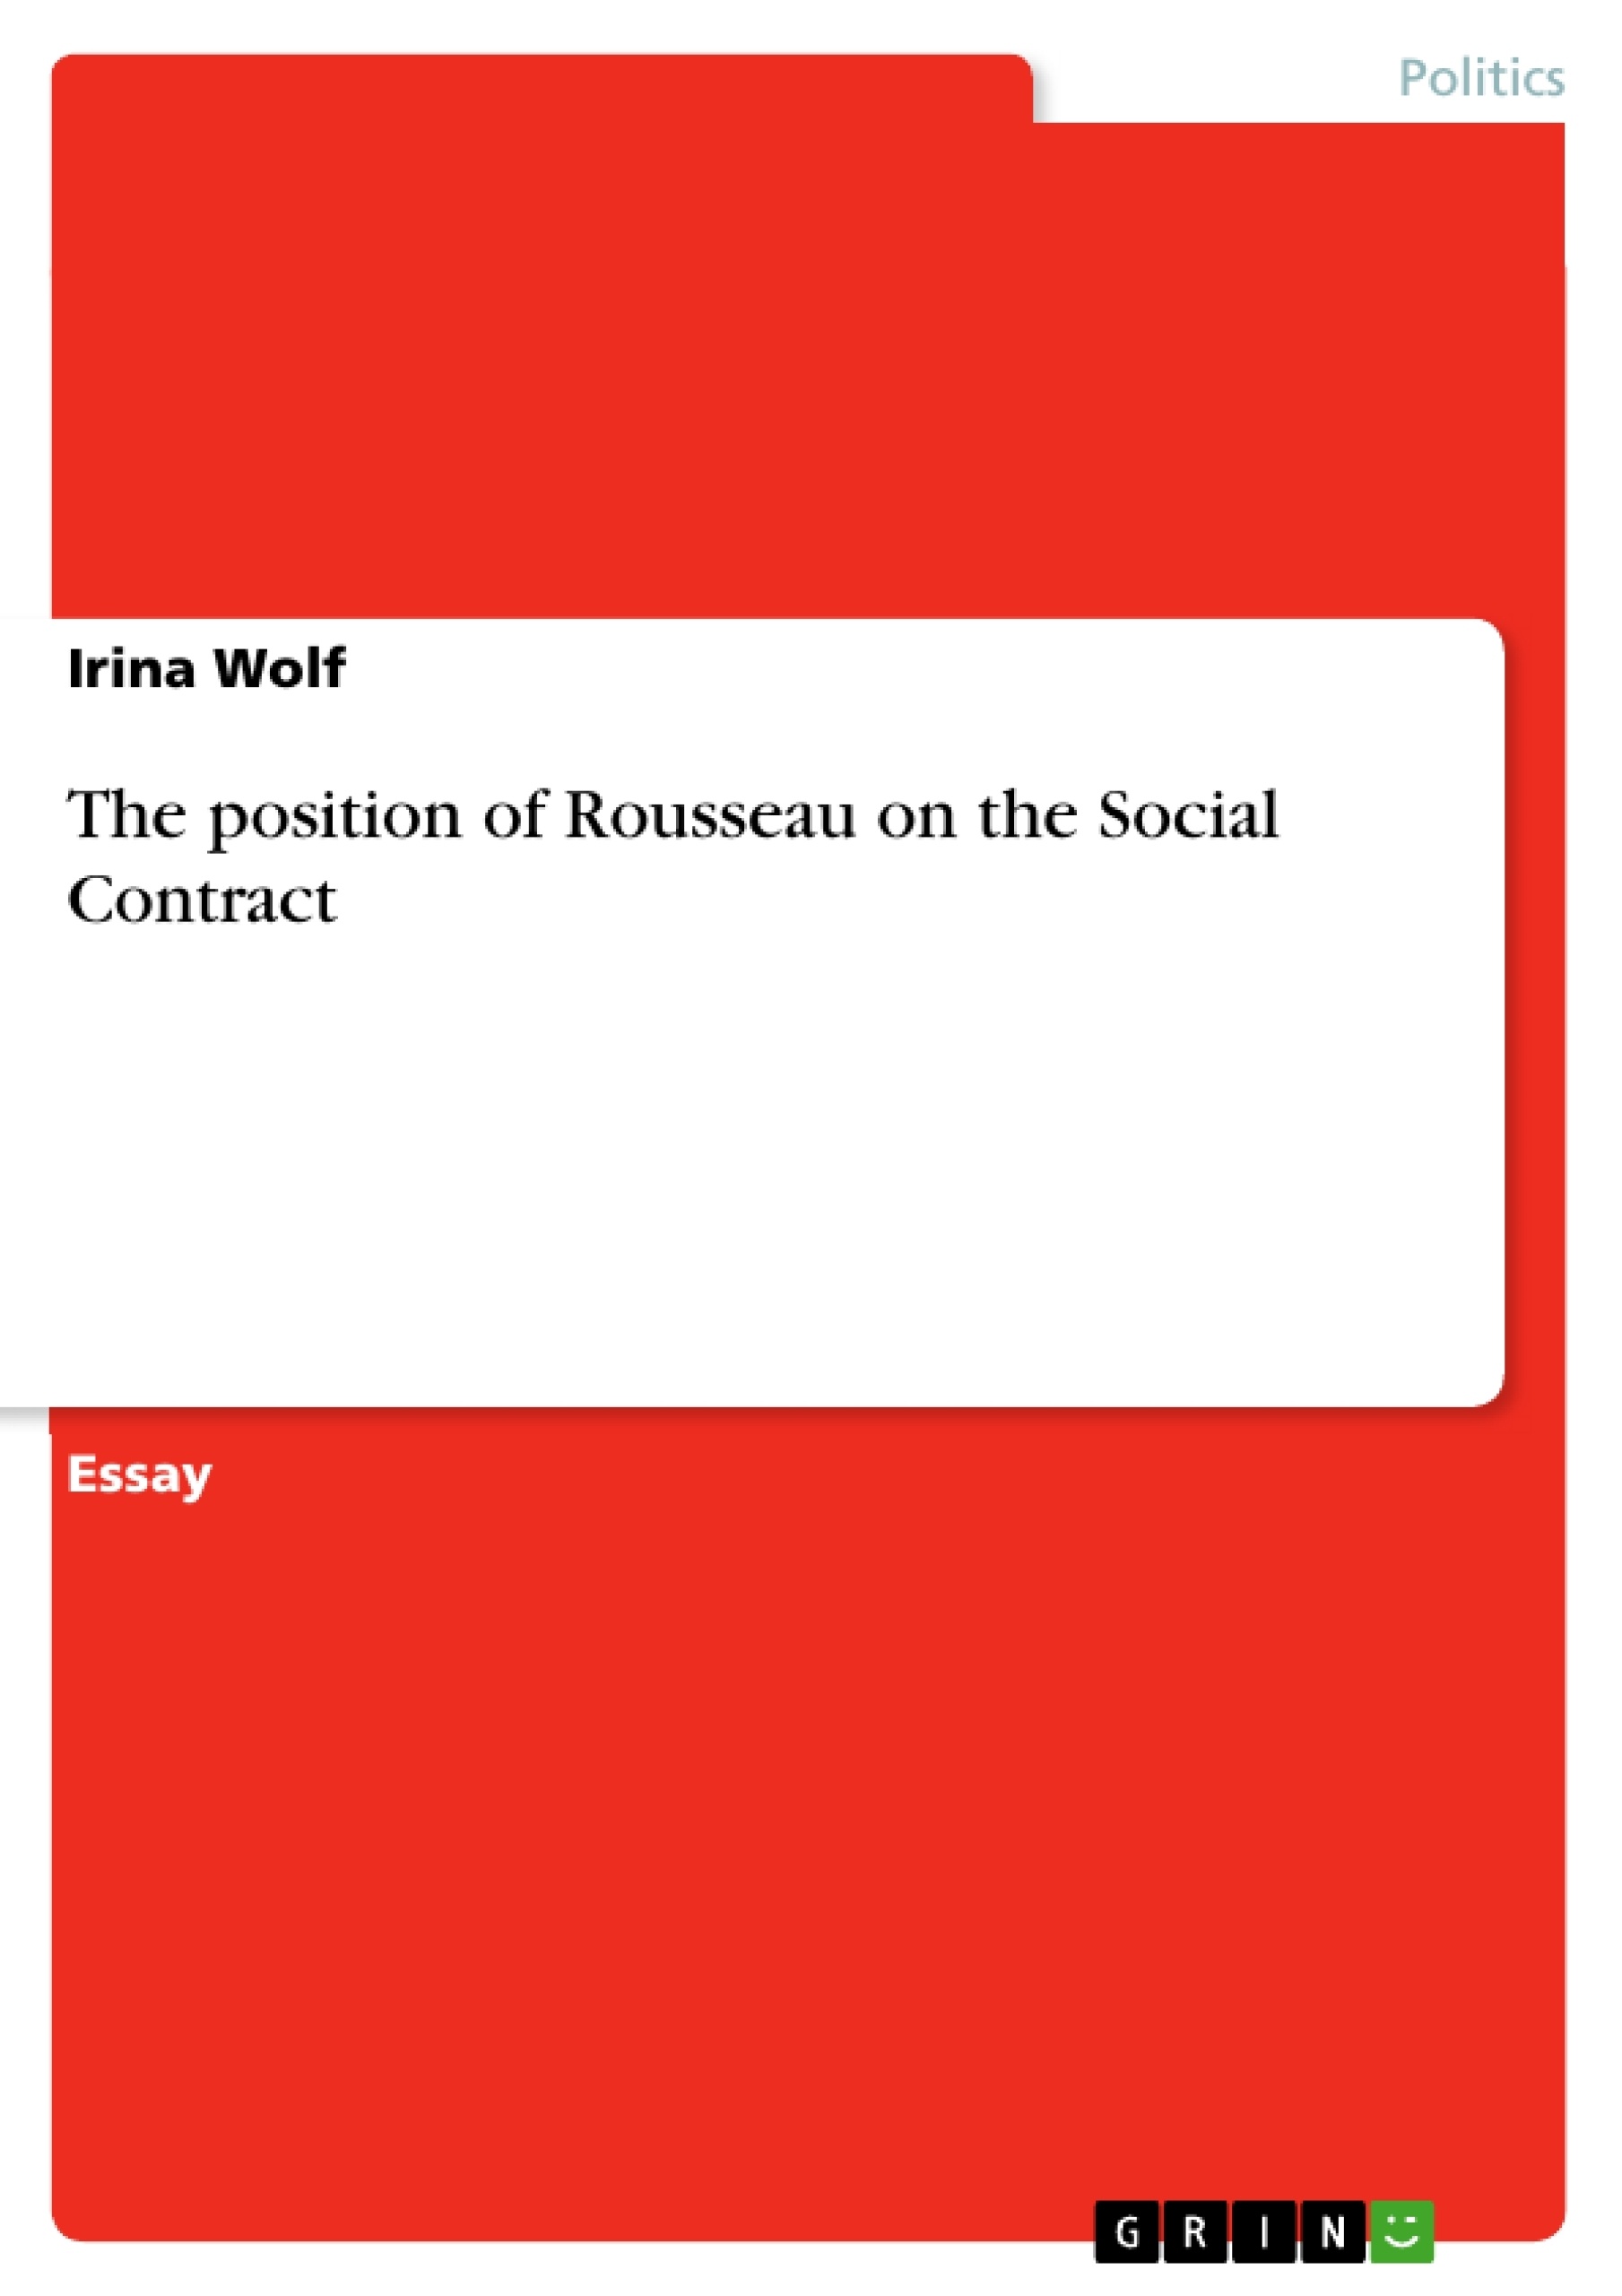 Title: The position of Rousseau on the Social Contract